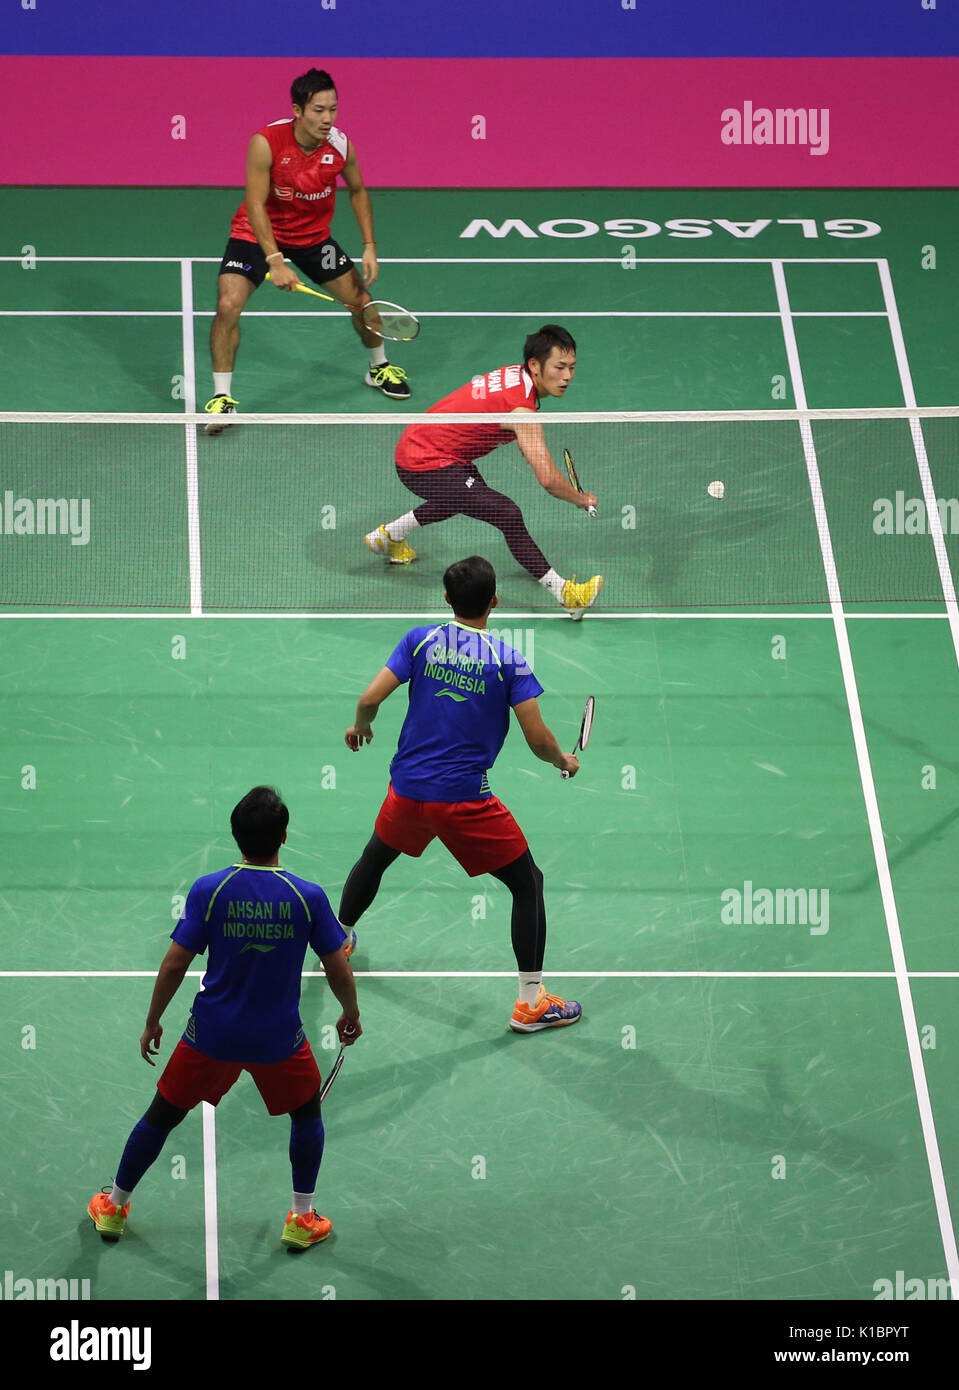 A general view of the main show court during the semi final of the mens doubles between (bottom) Indonesia's Mohammad Ahsan and Rian Agung Saputro and (top) Japan's Takeshi Kamura and Keigo Sonoda on day six of the 2017 BWF World Championships at the Emirates Arena, Glasgow. Stock Photo